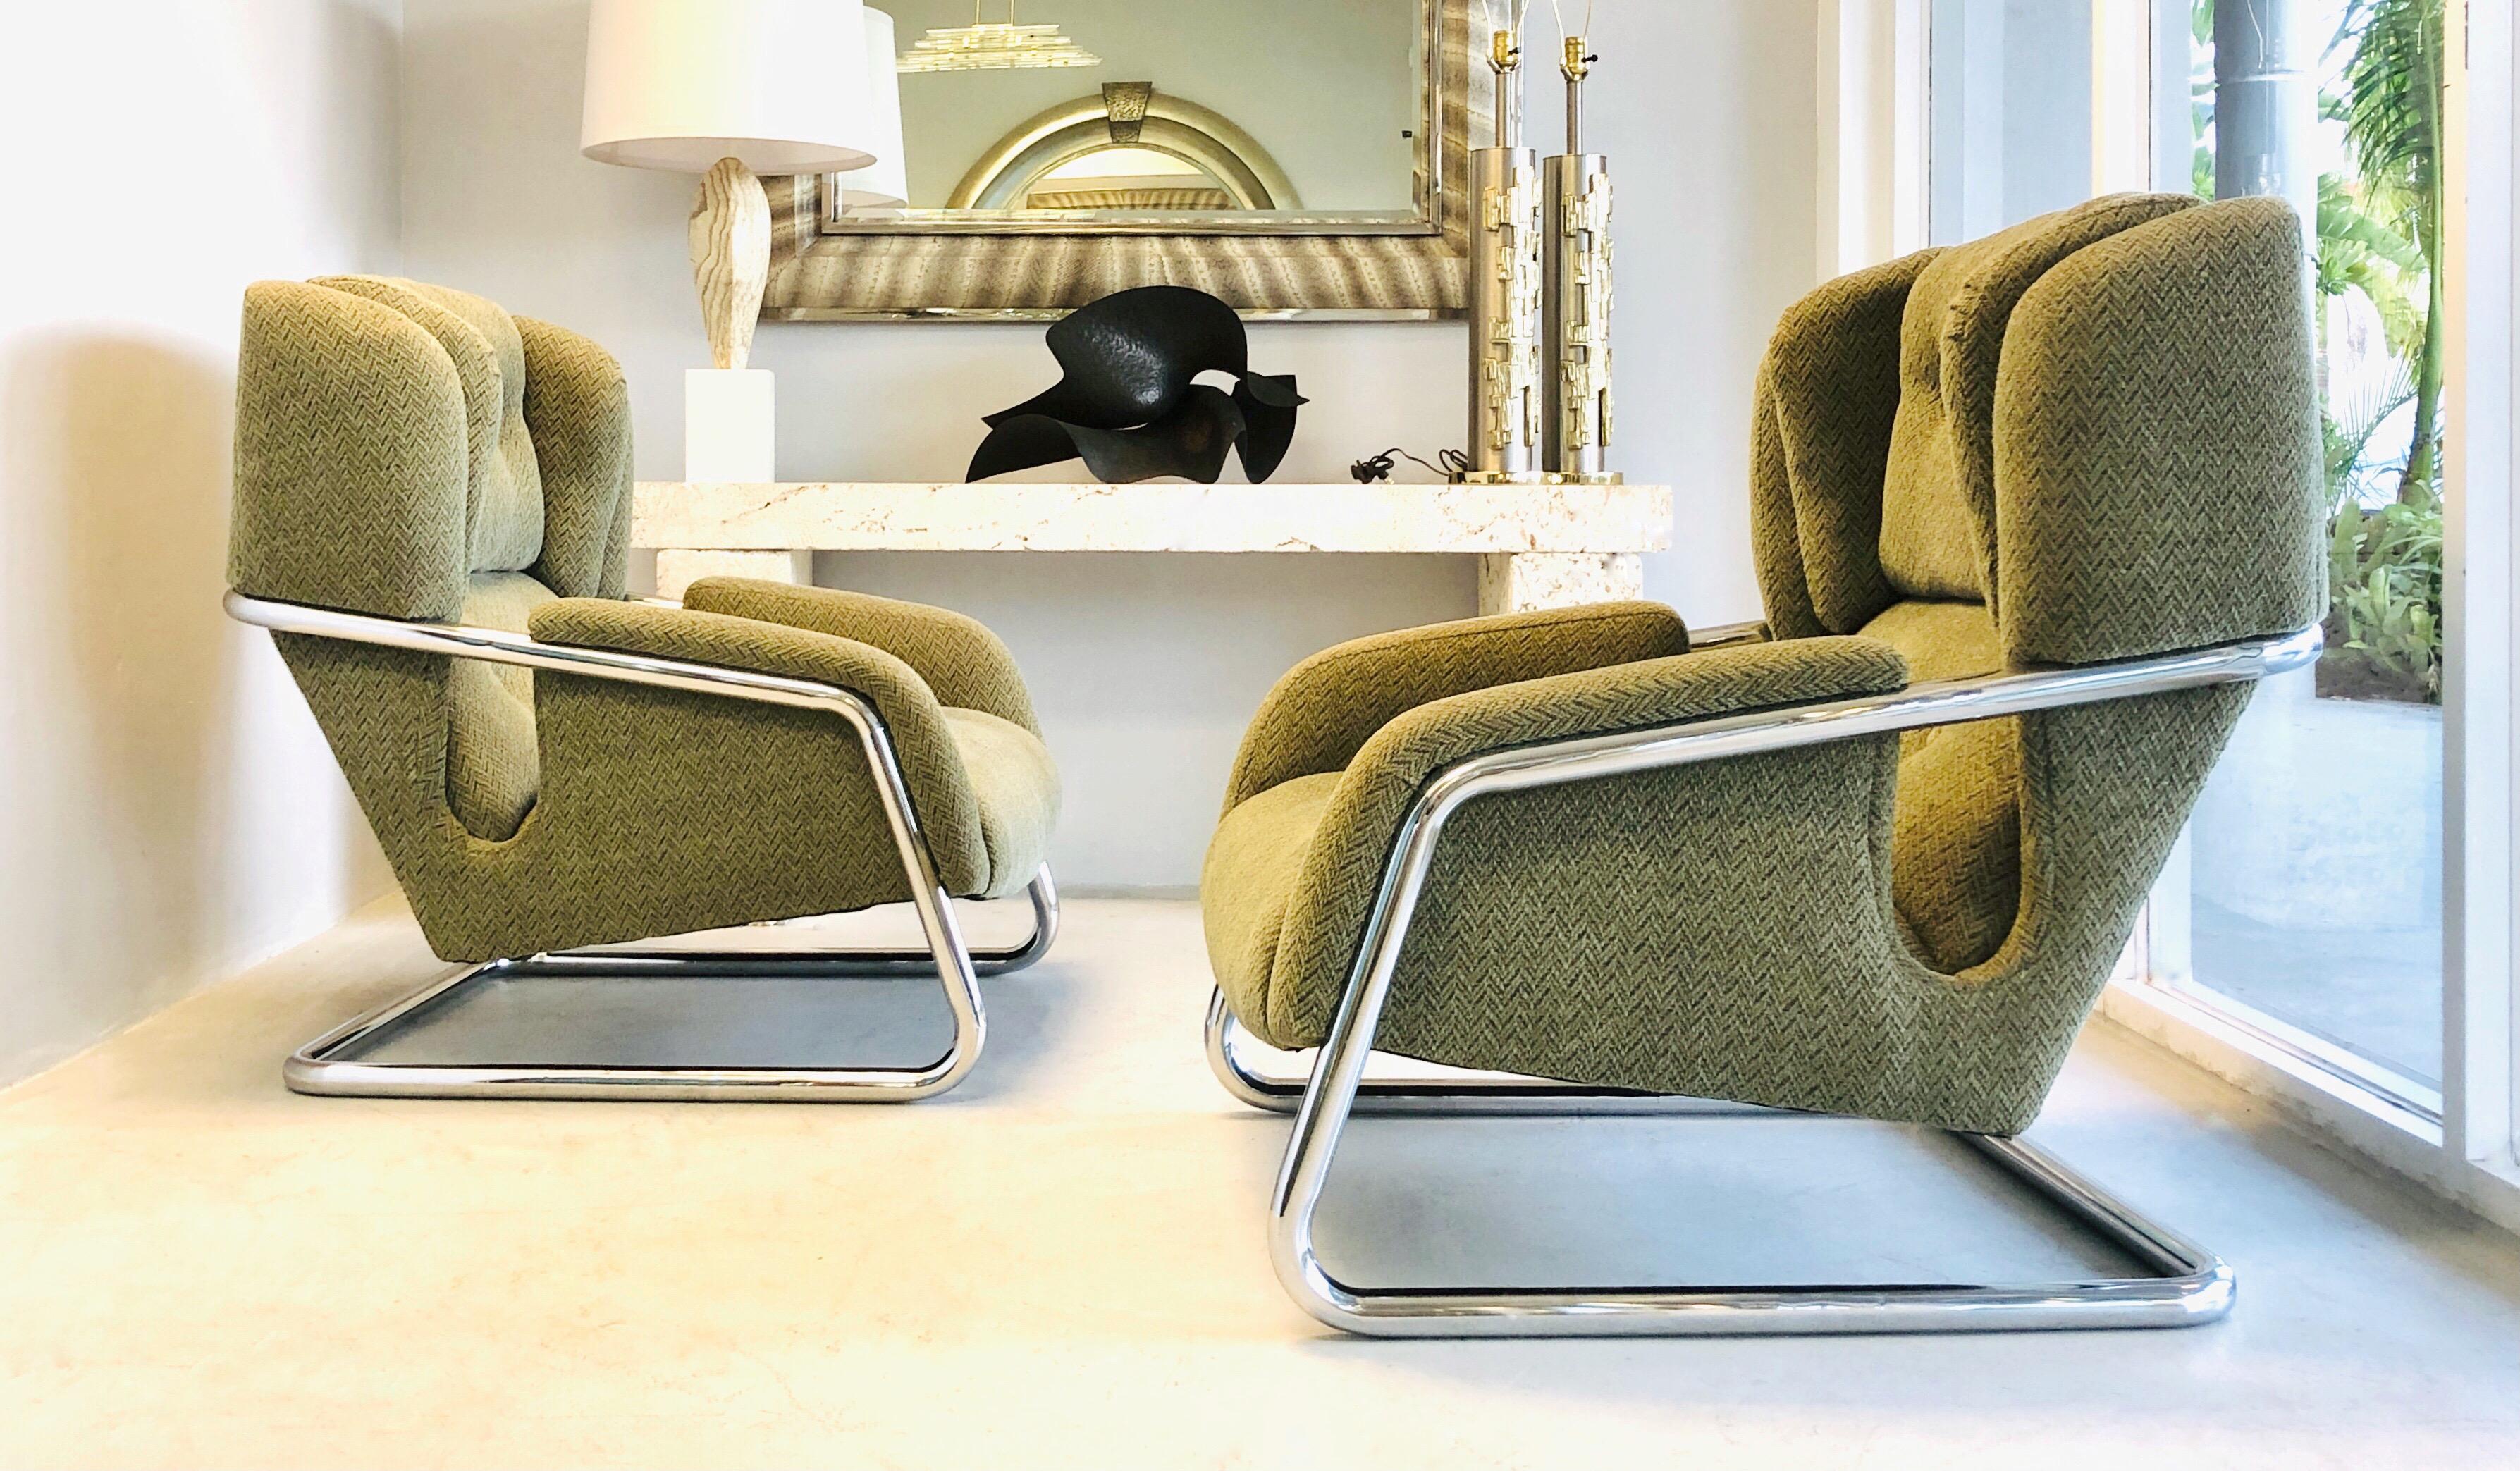 A pair of extraordinary 1970s lounge chairs. Very sophisticated cantilevered design. Original upholstery.